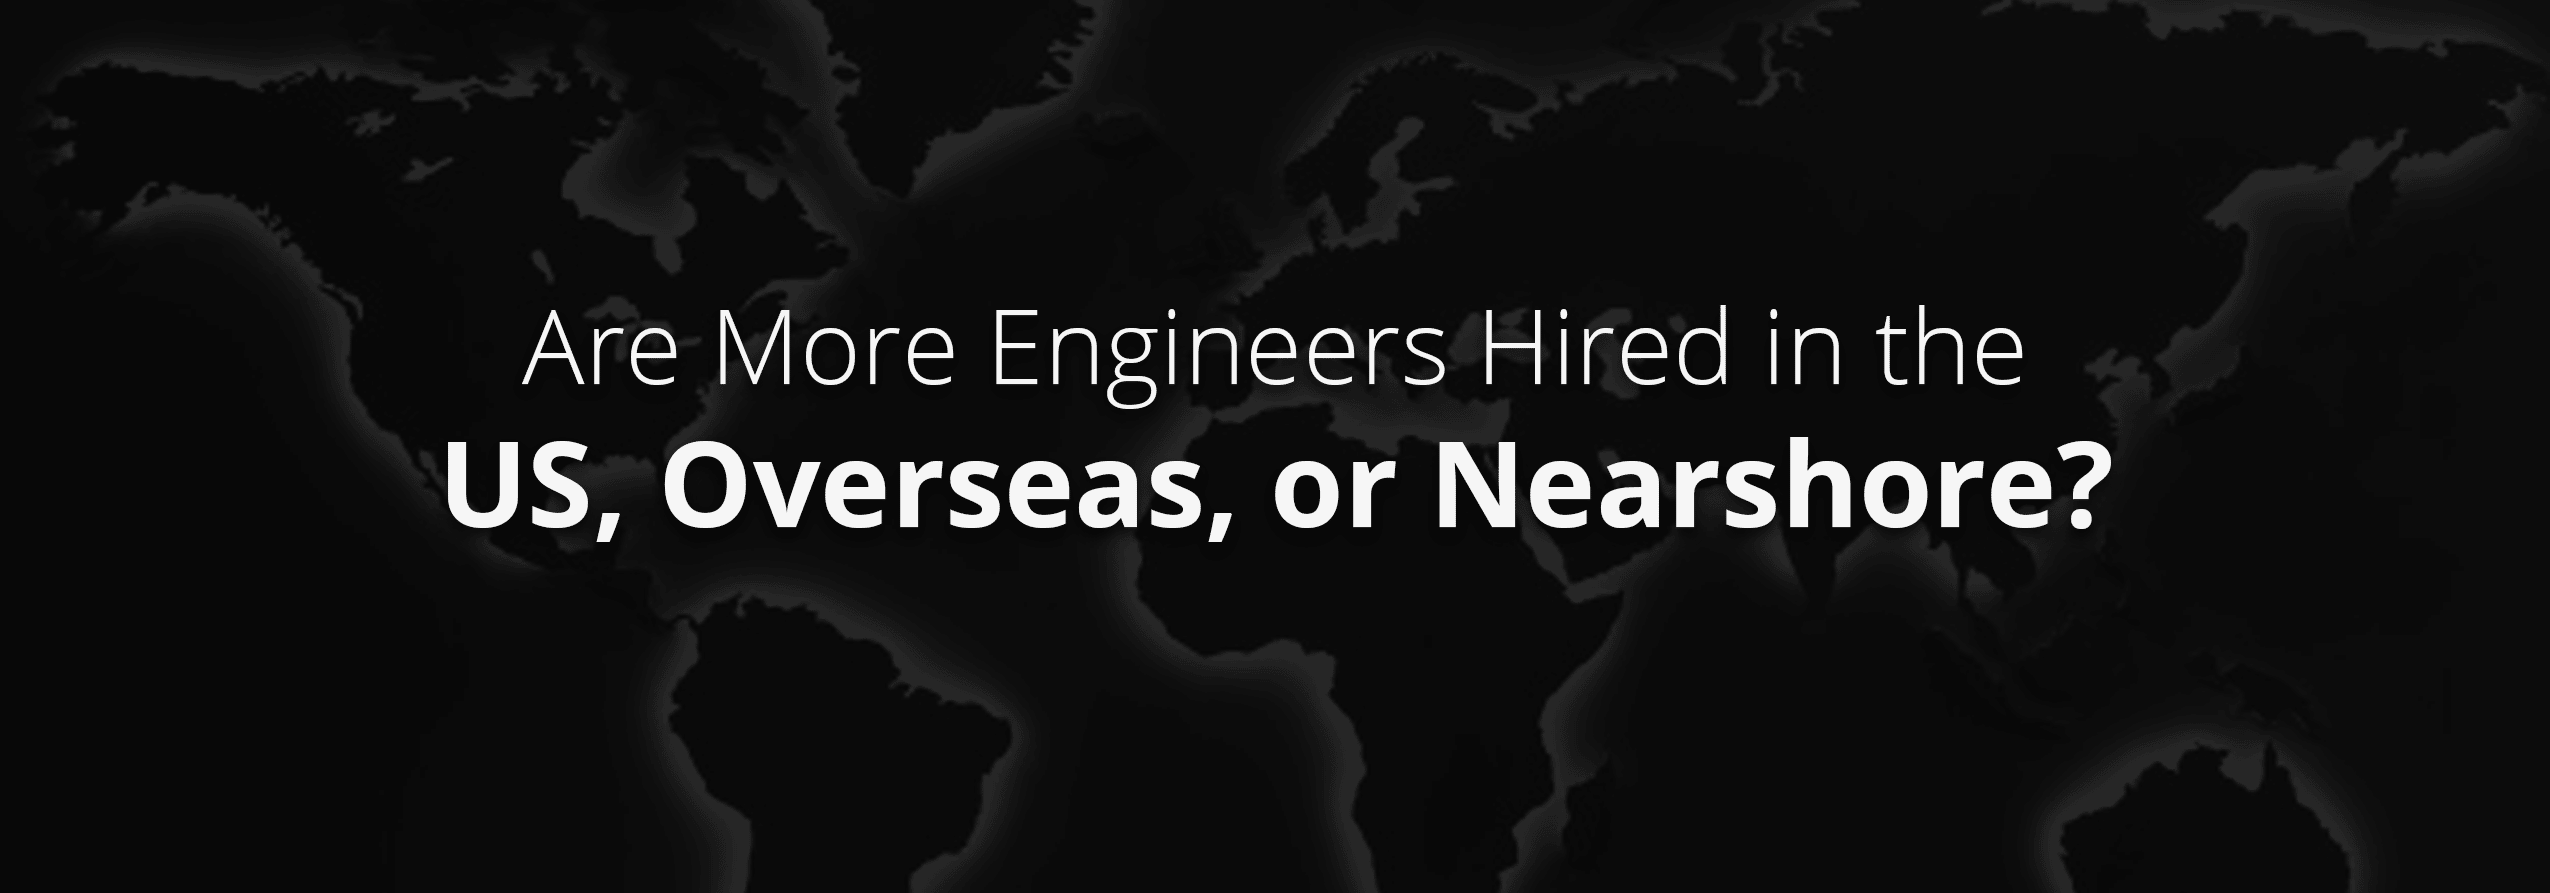 What Have Been the Hiring Trends of Software Engineers in the Past 6 Months